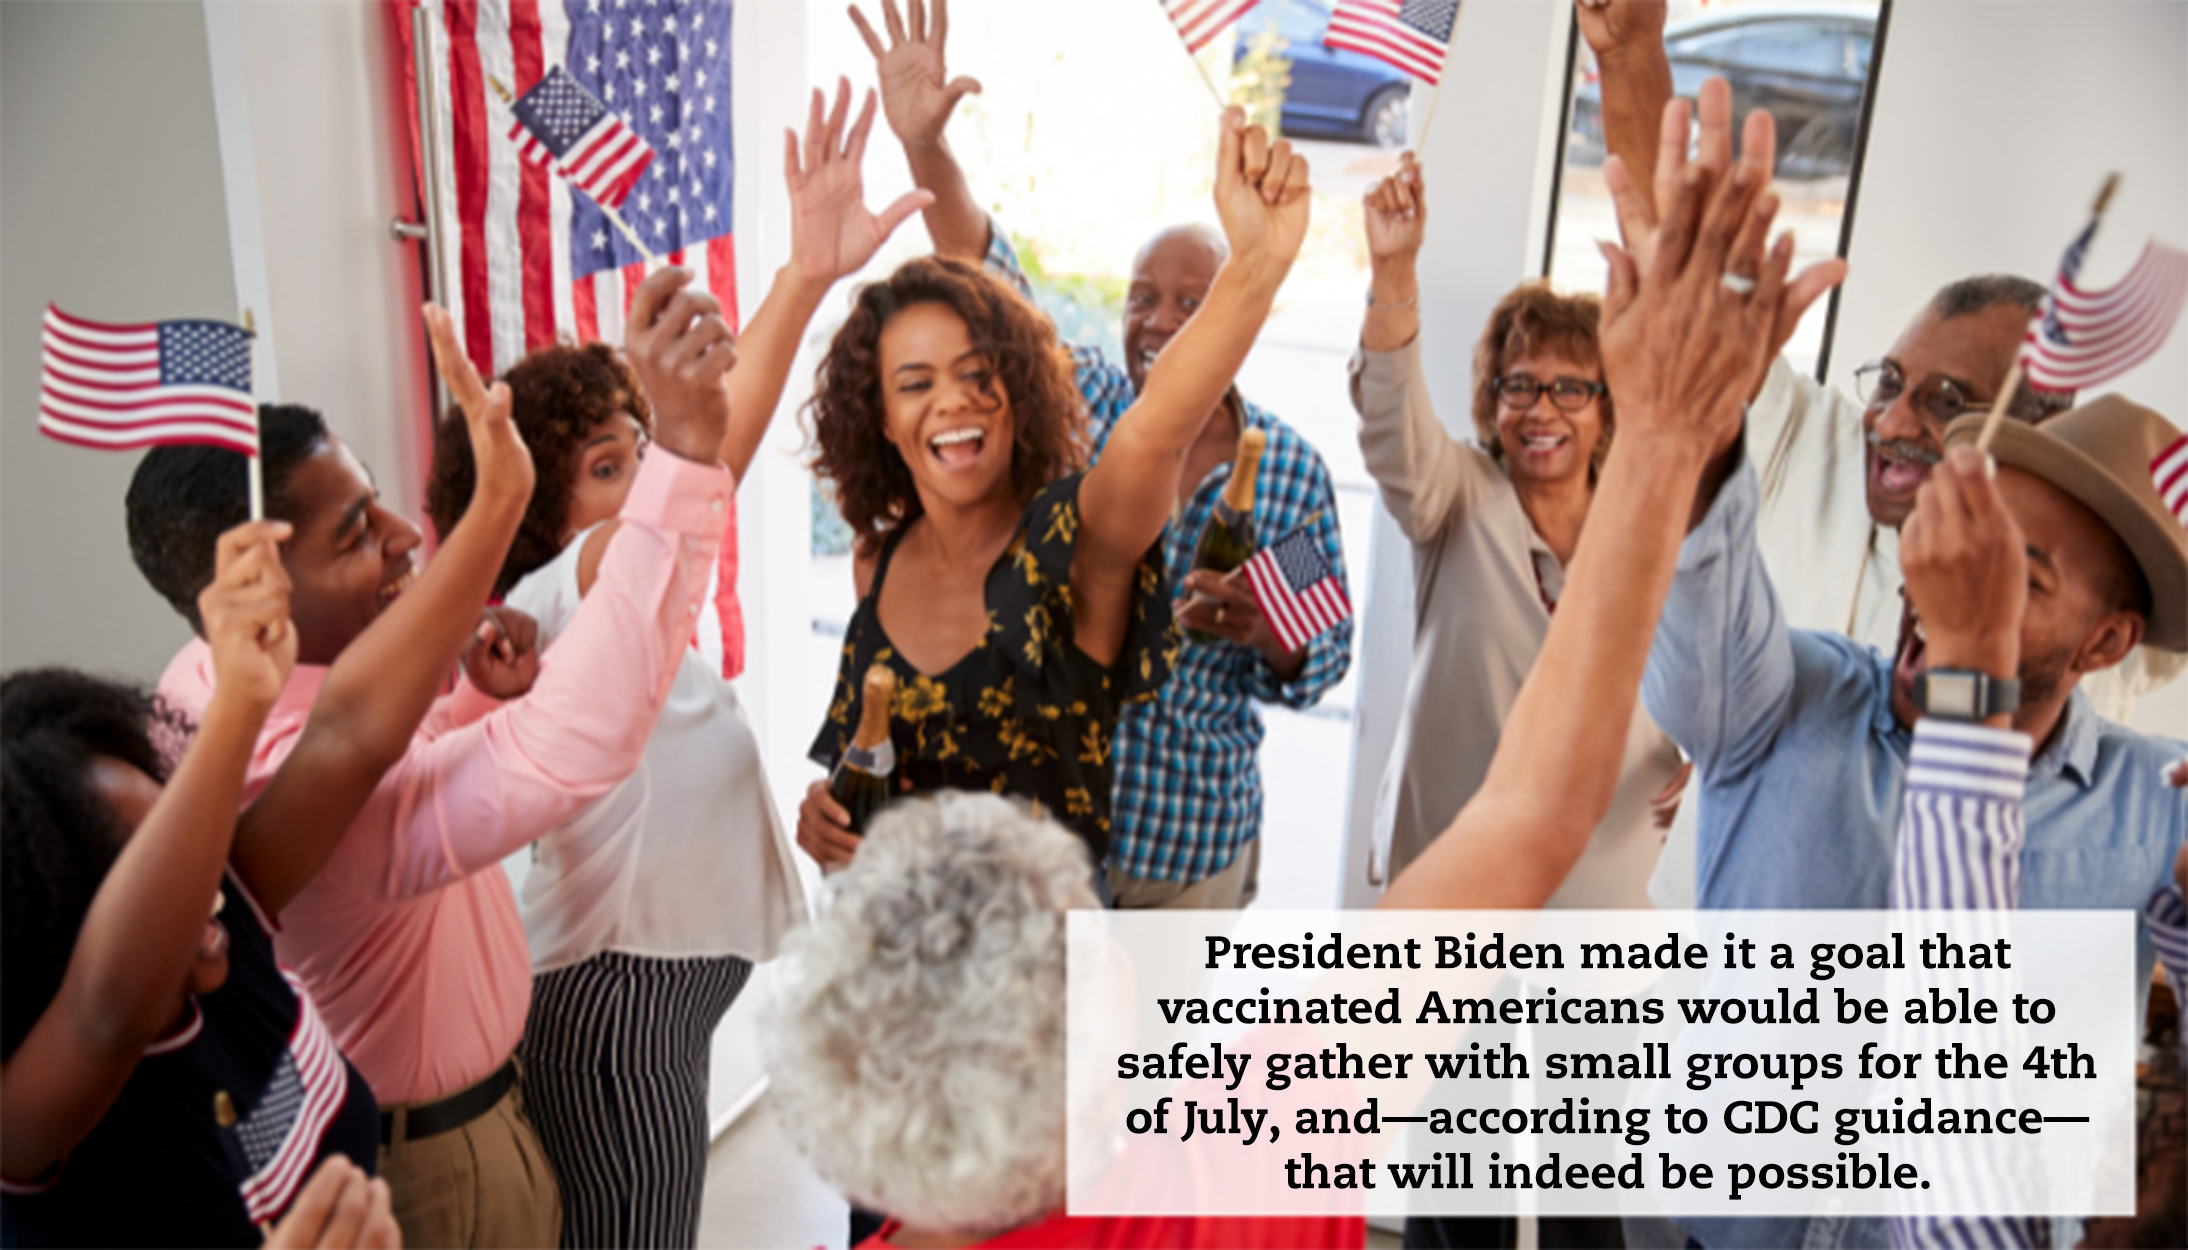 A group of people celebrating and holding small American flags up. A caption reads: "President Biden made it a goal that vaccinated Americans would be able to safely gather with small groups for the 4th of July, and—according to CDC guidance— that will indeed be possible."